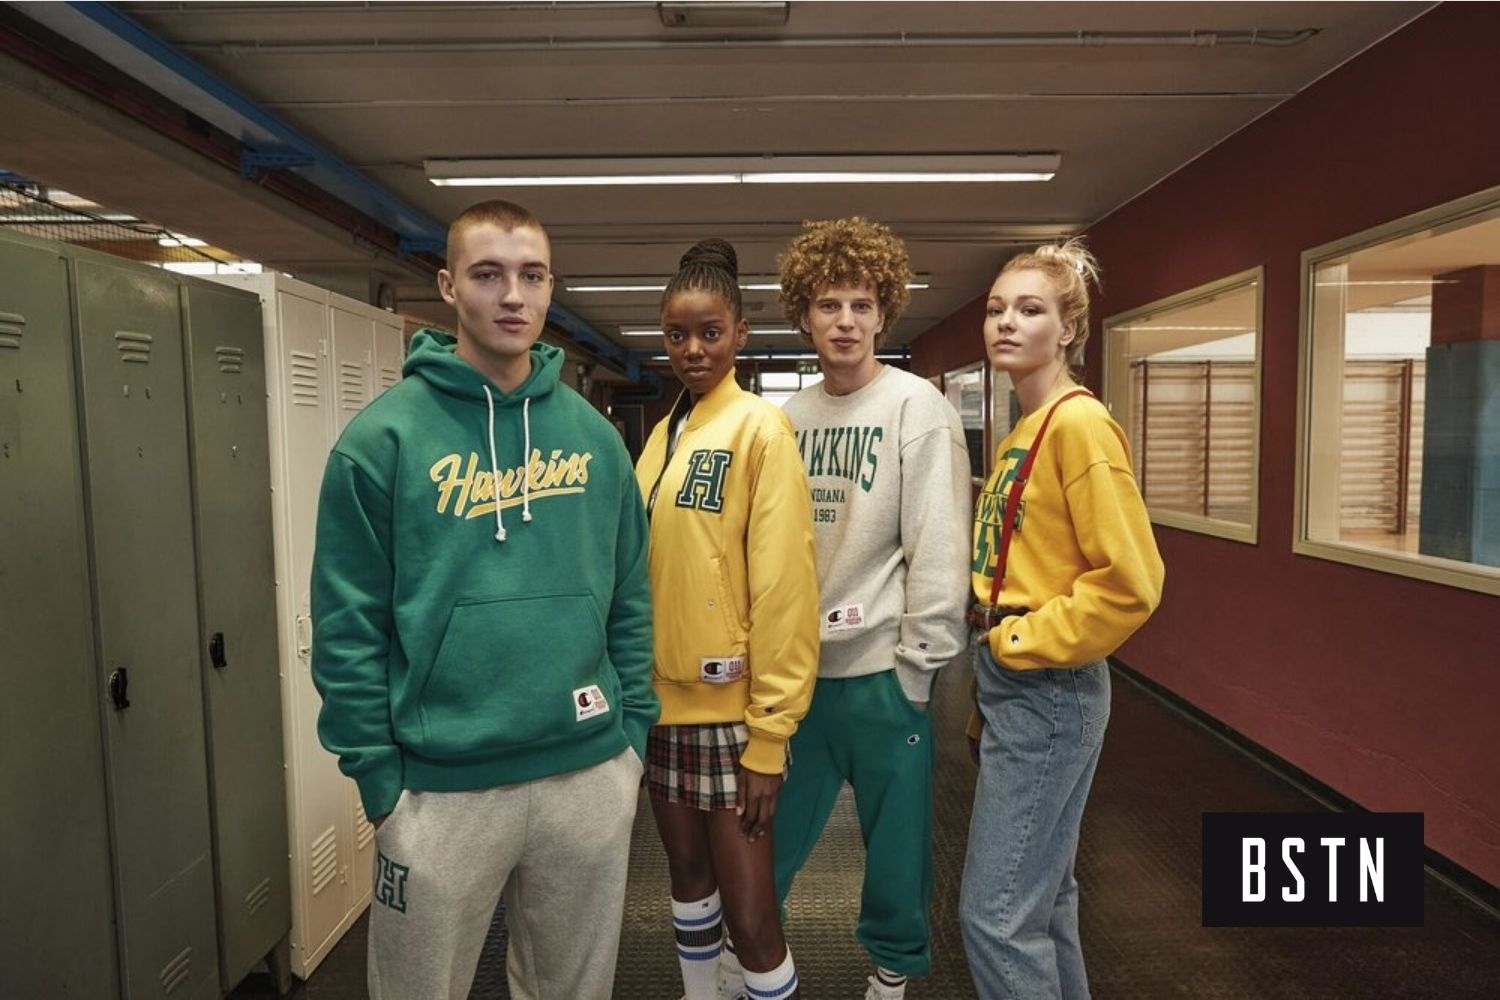 Shop the Champions x Stranger Things collection at BSTN